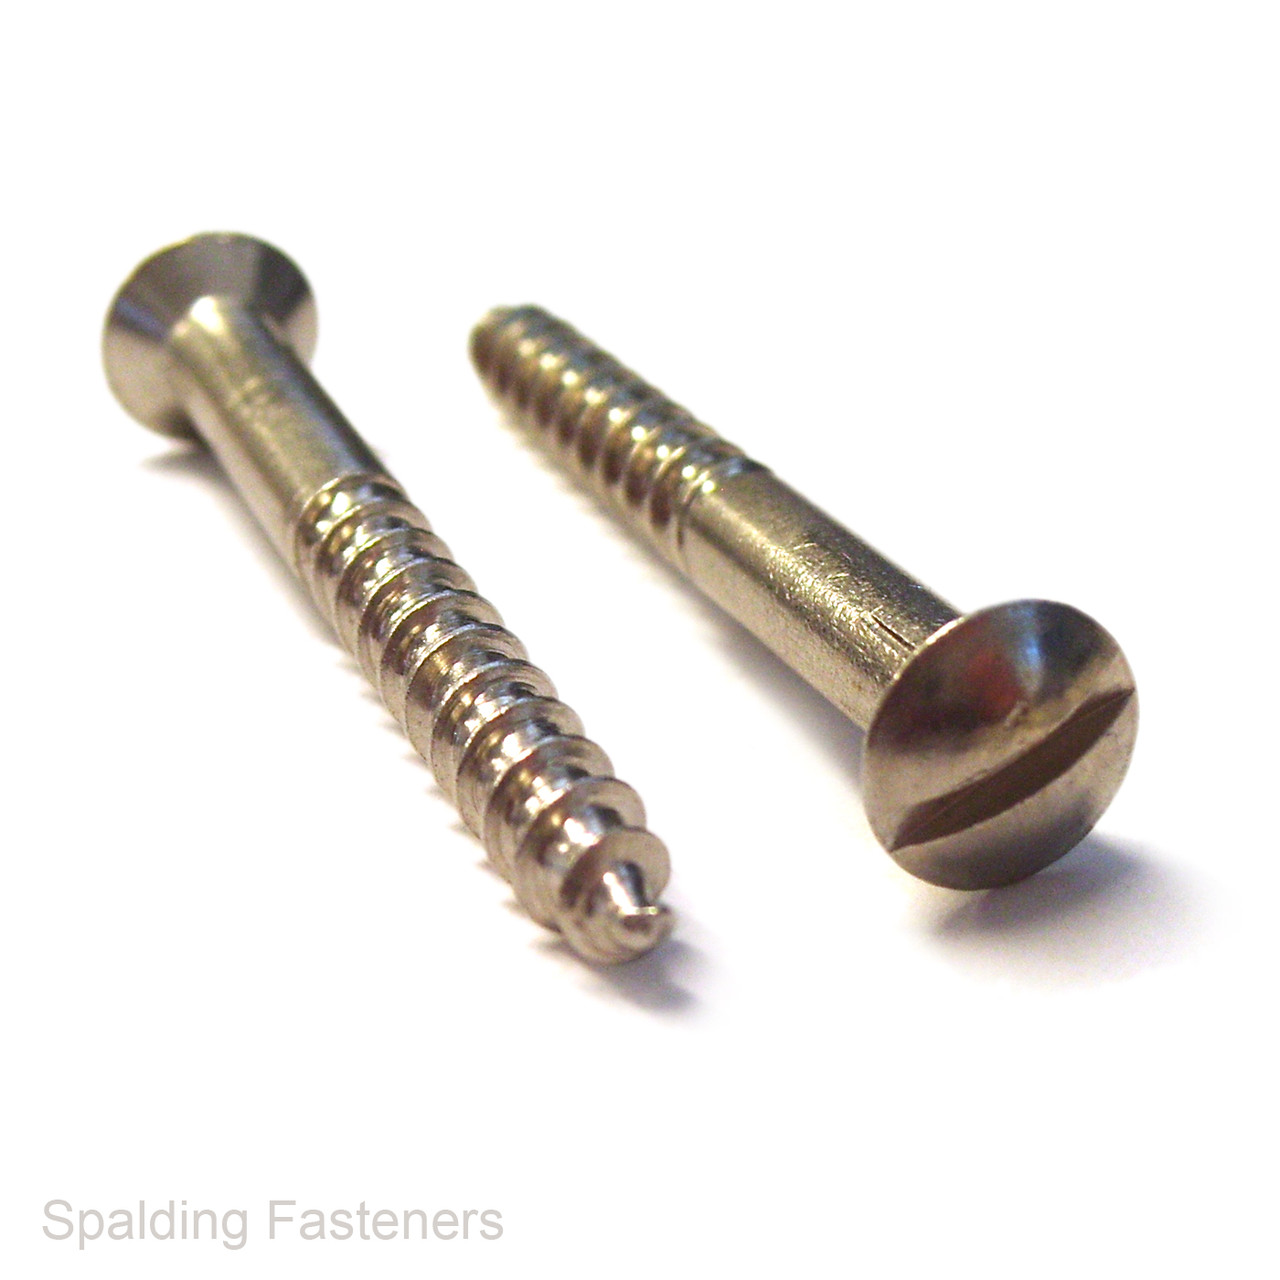 No.12 A2 Grade Stainless Steel Raised Countersunk Slotted Head Woodscrews